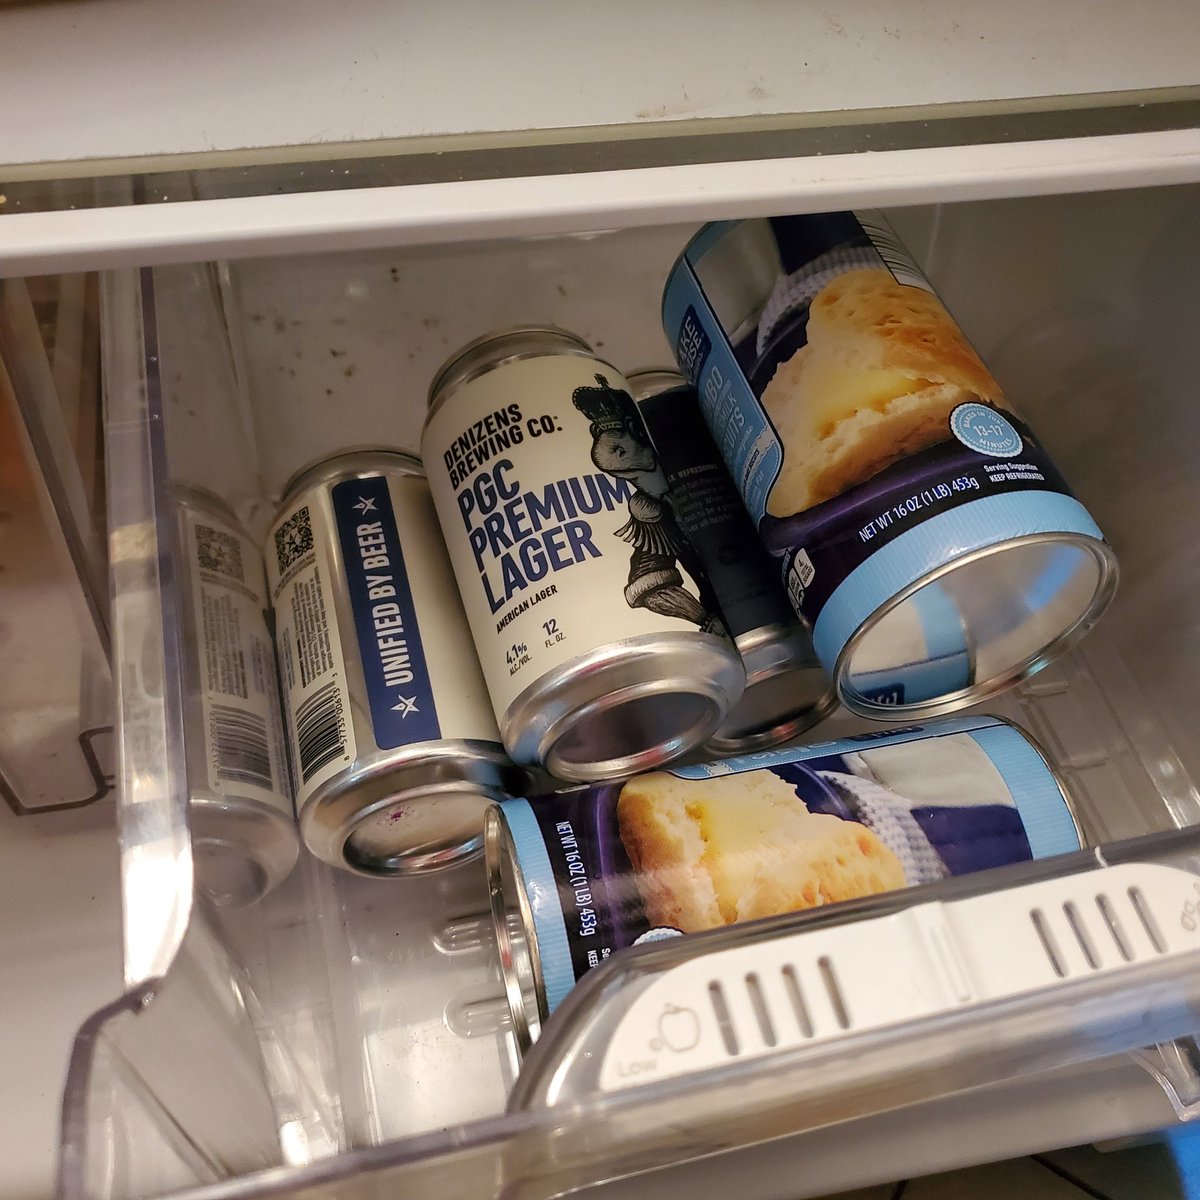 Looked in the 'crisper' drawer earlier for dinner ideas...seems about right #BiscuitsAndBeer